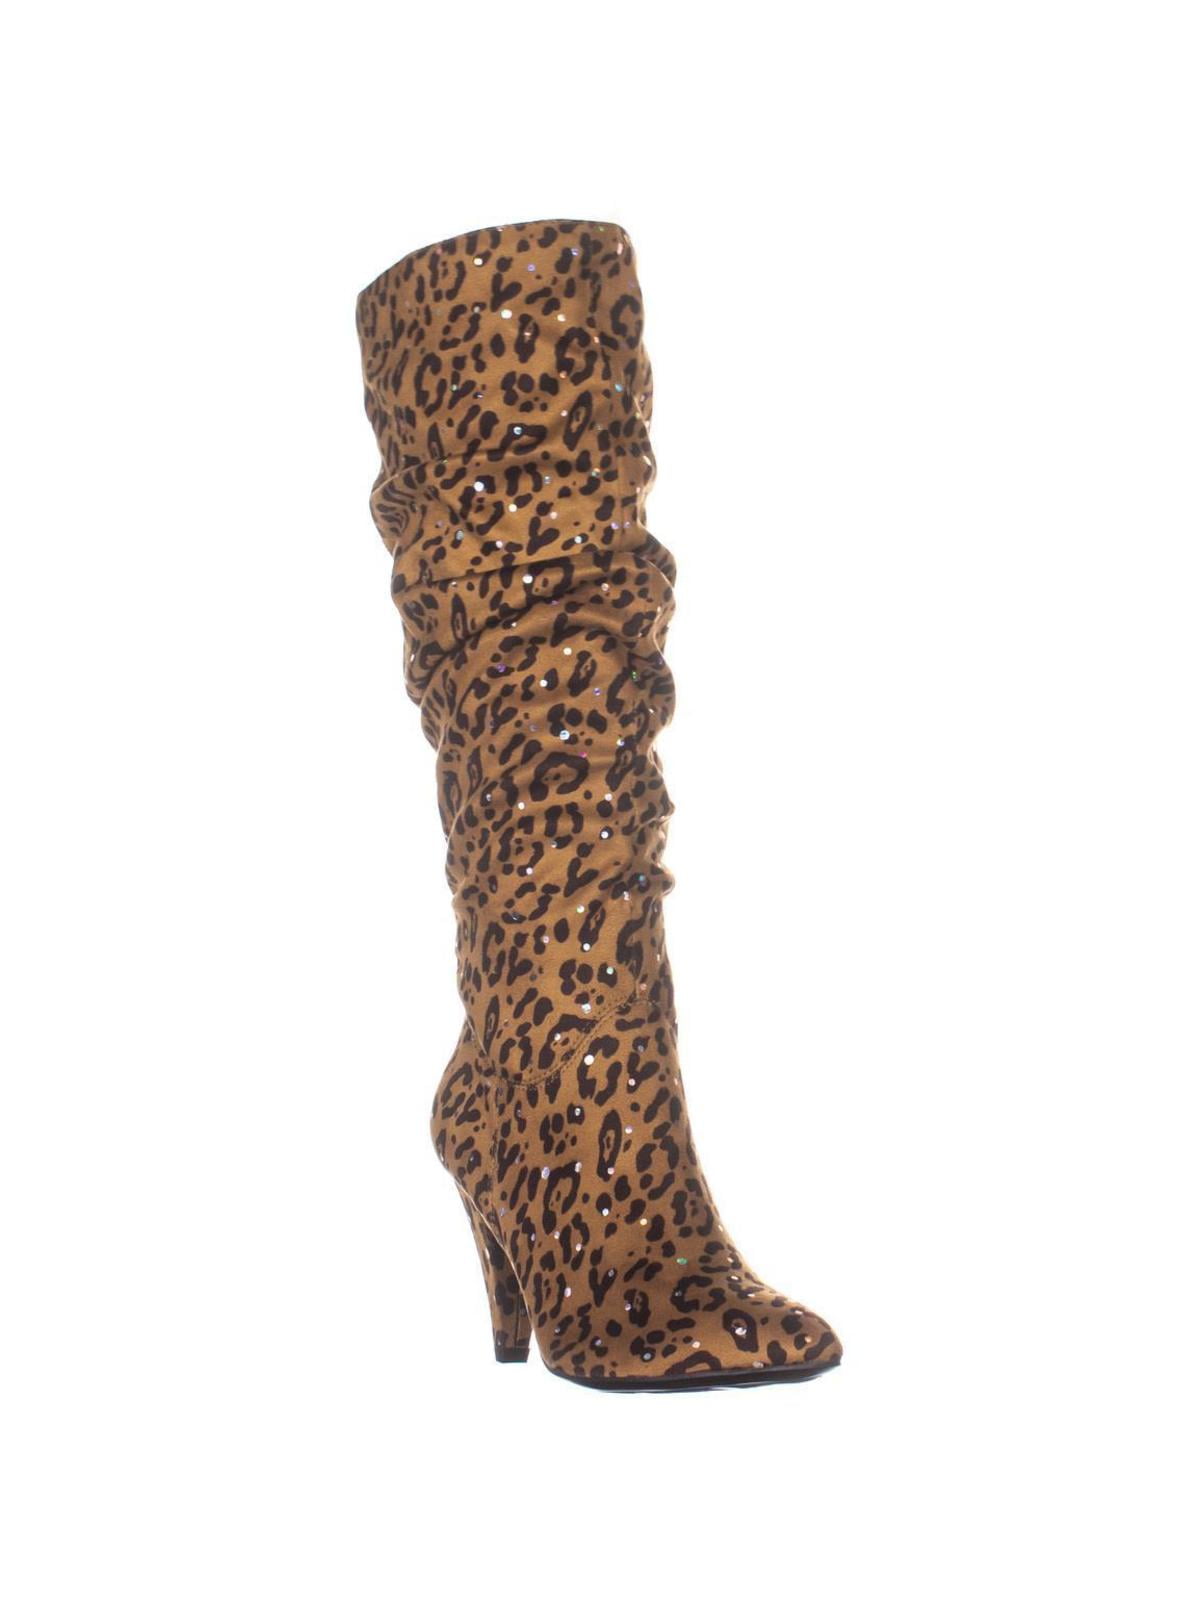 Womens Impo Theodora Slouch Knee High Boots, Tan Multi Leopard, 8 US ...